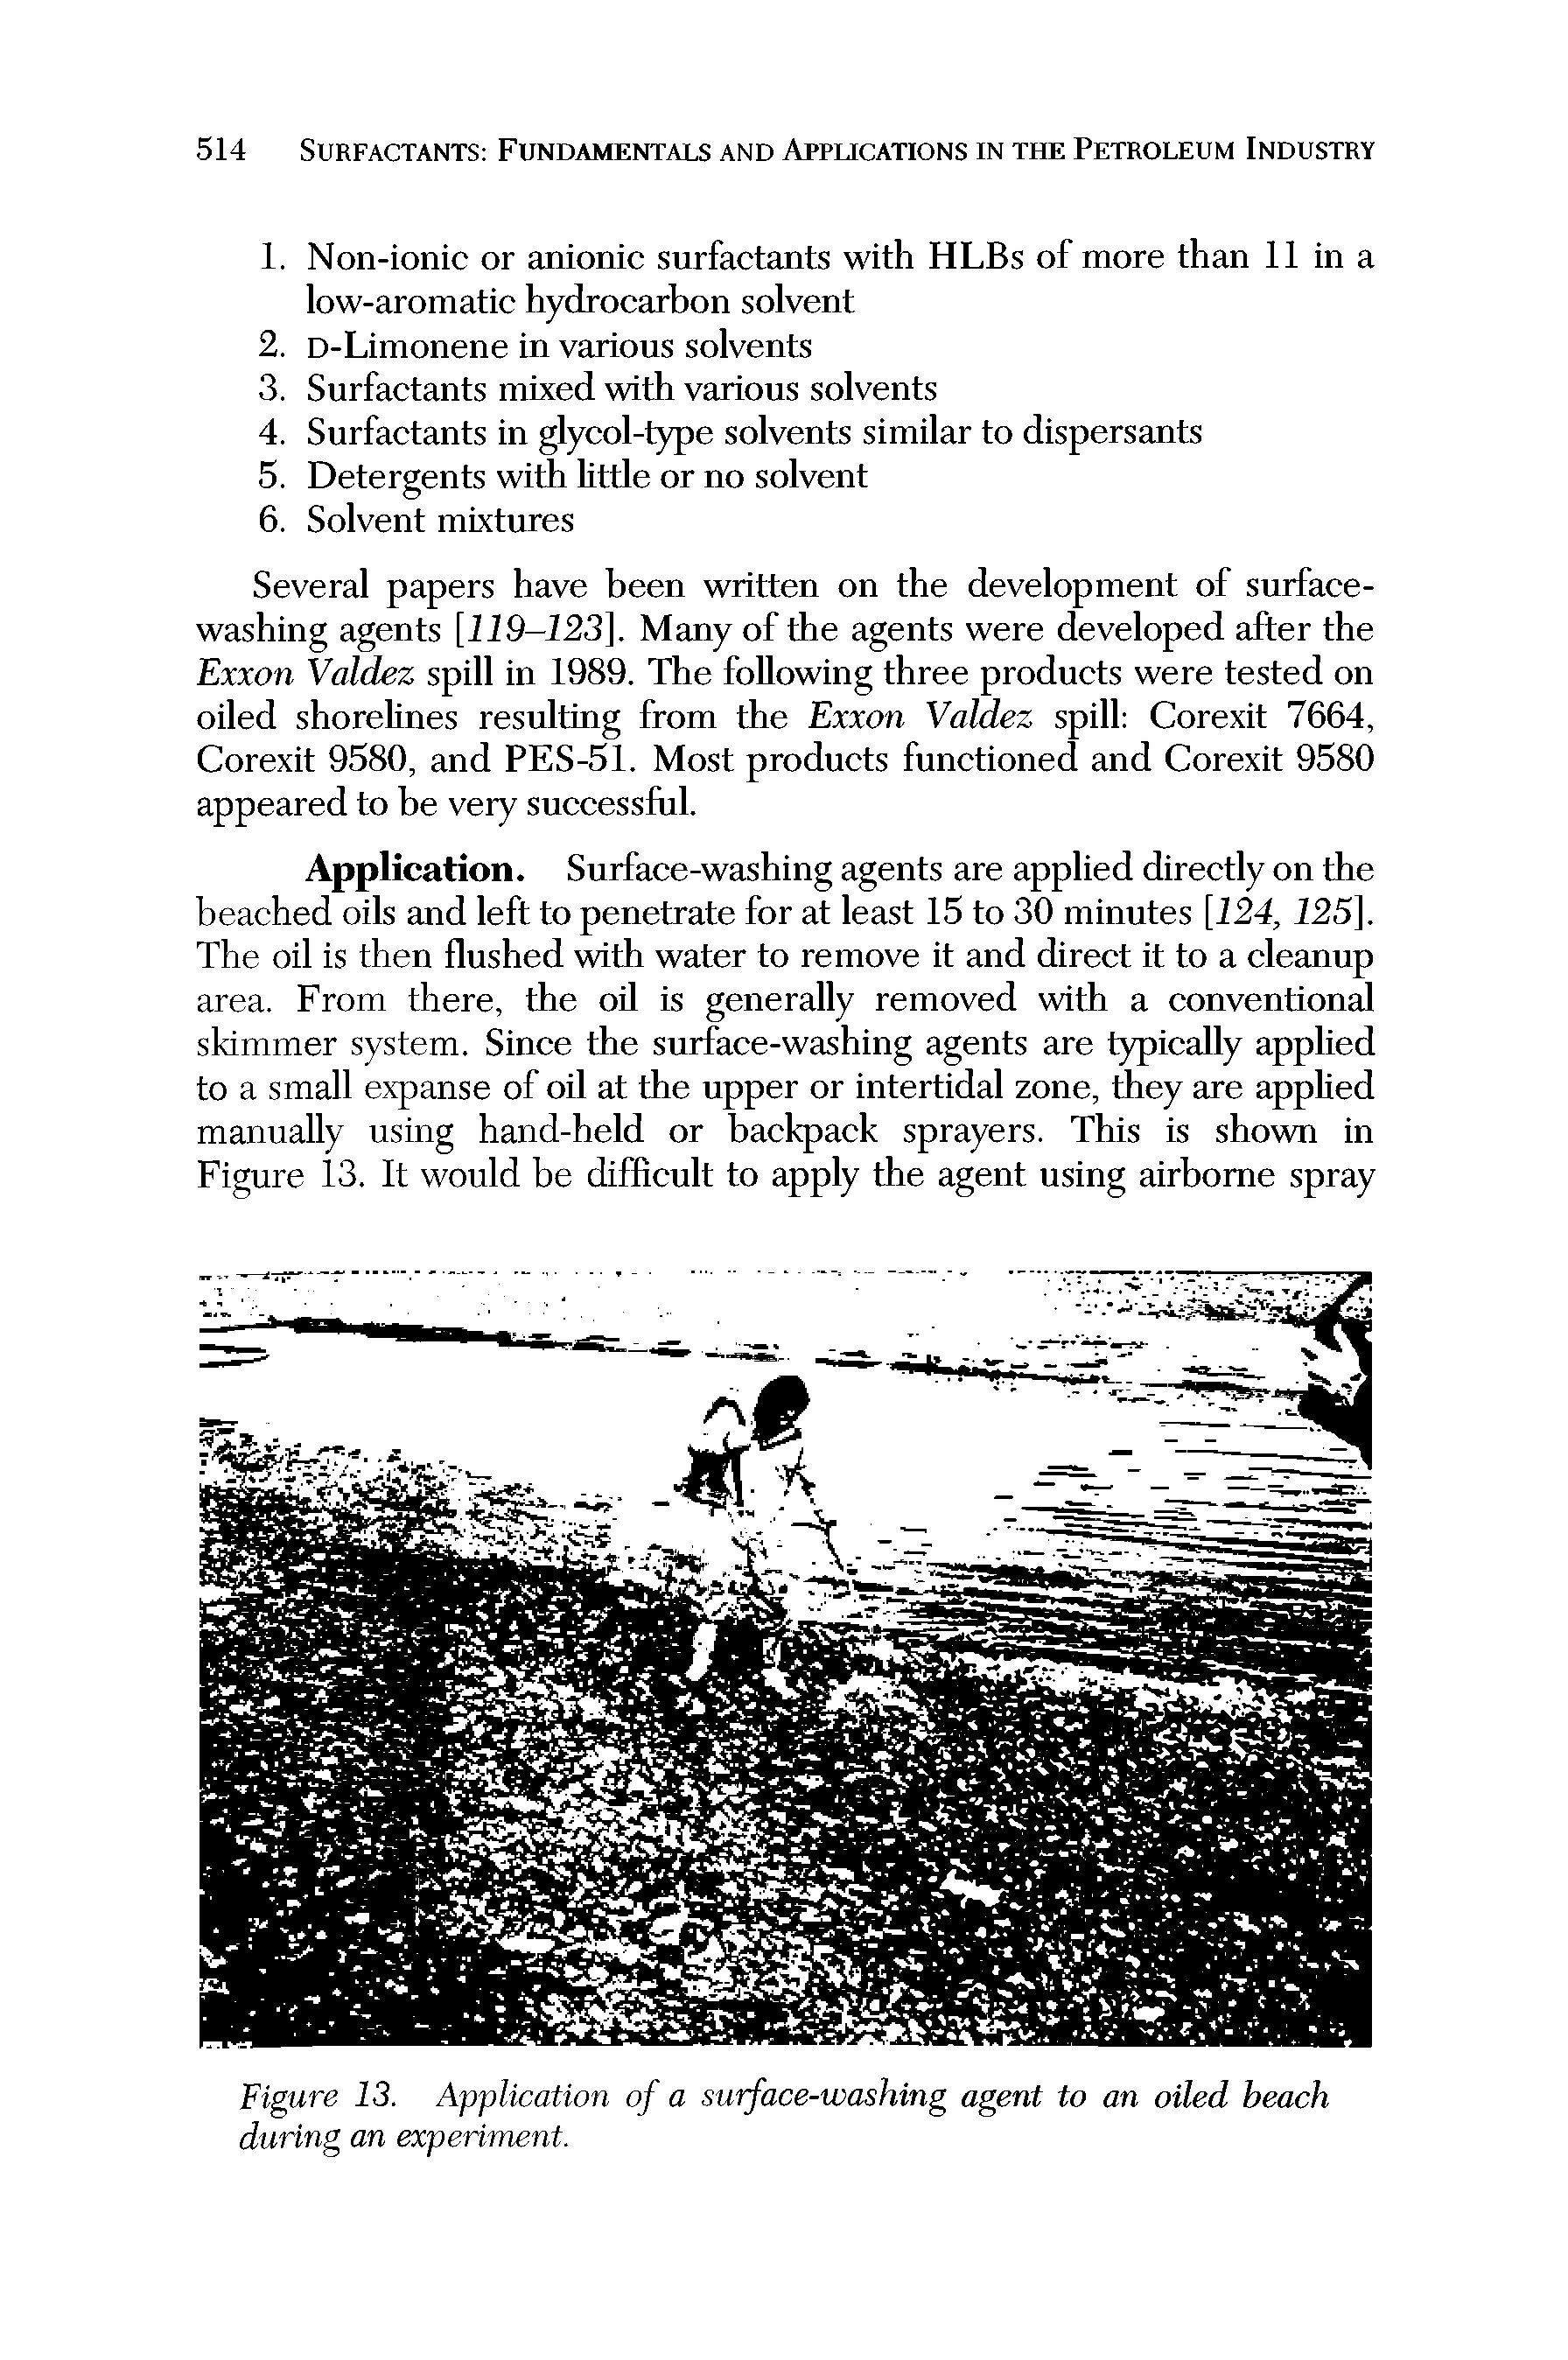 Figure 13. Application of a surface-washing agent to an oiled beach during an experiment.